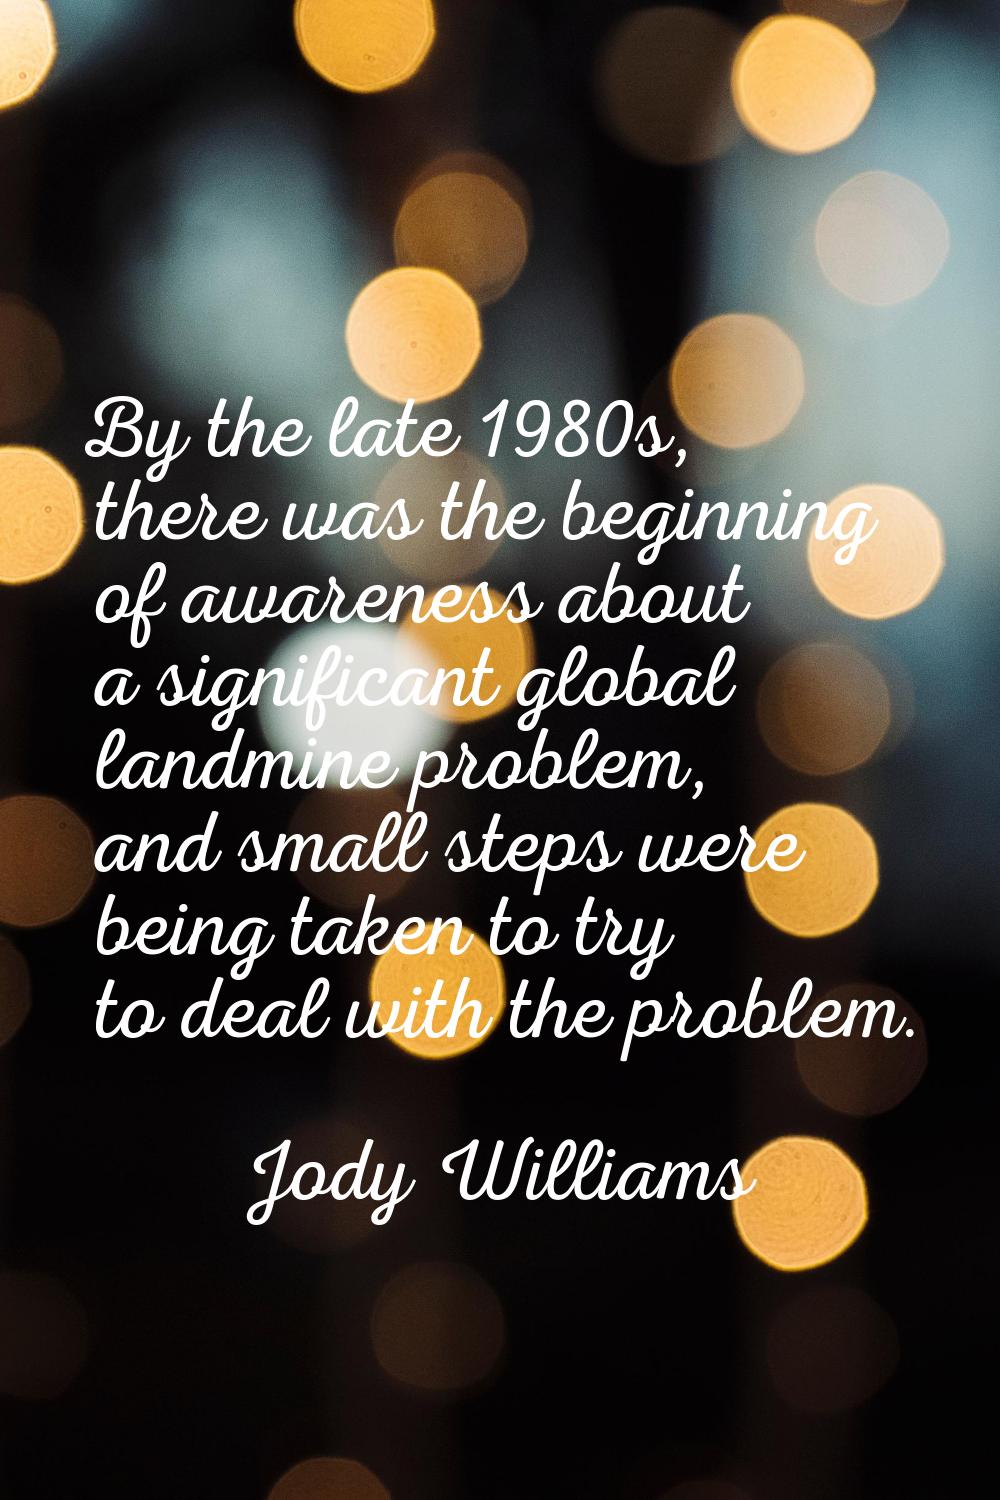 By the late 1980s, there was the beginning of awareness about a significant global landmine problem